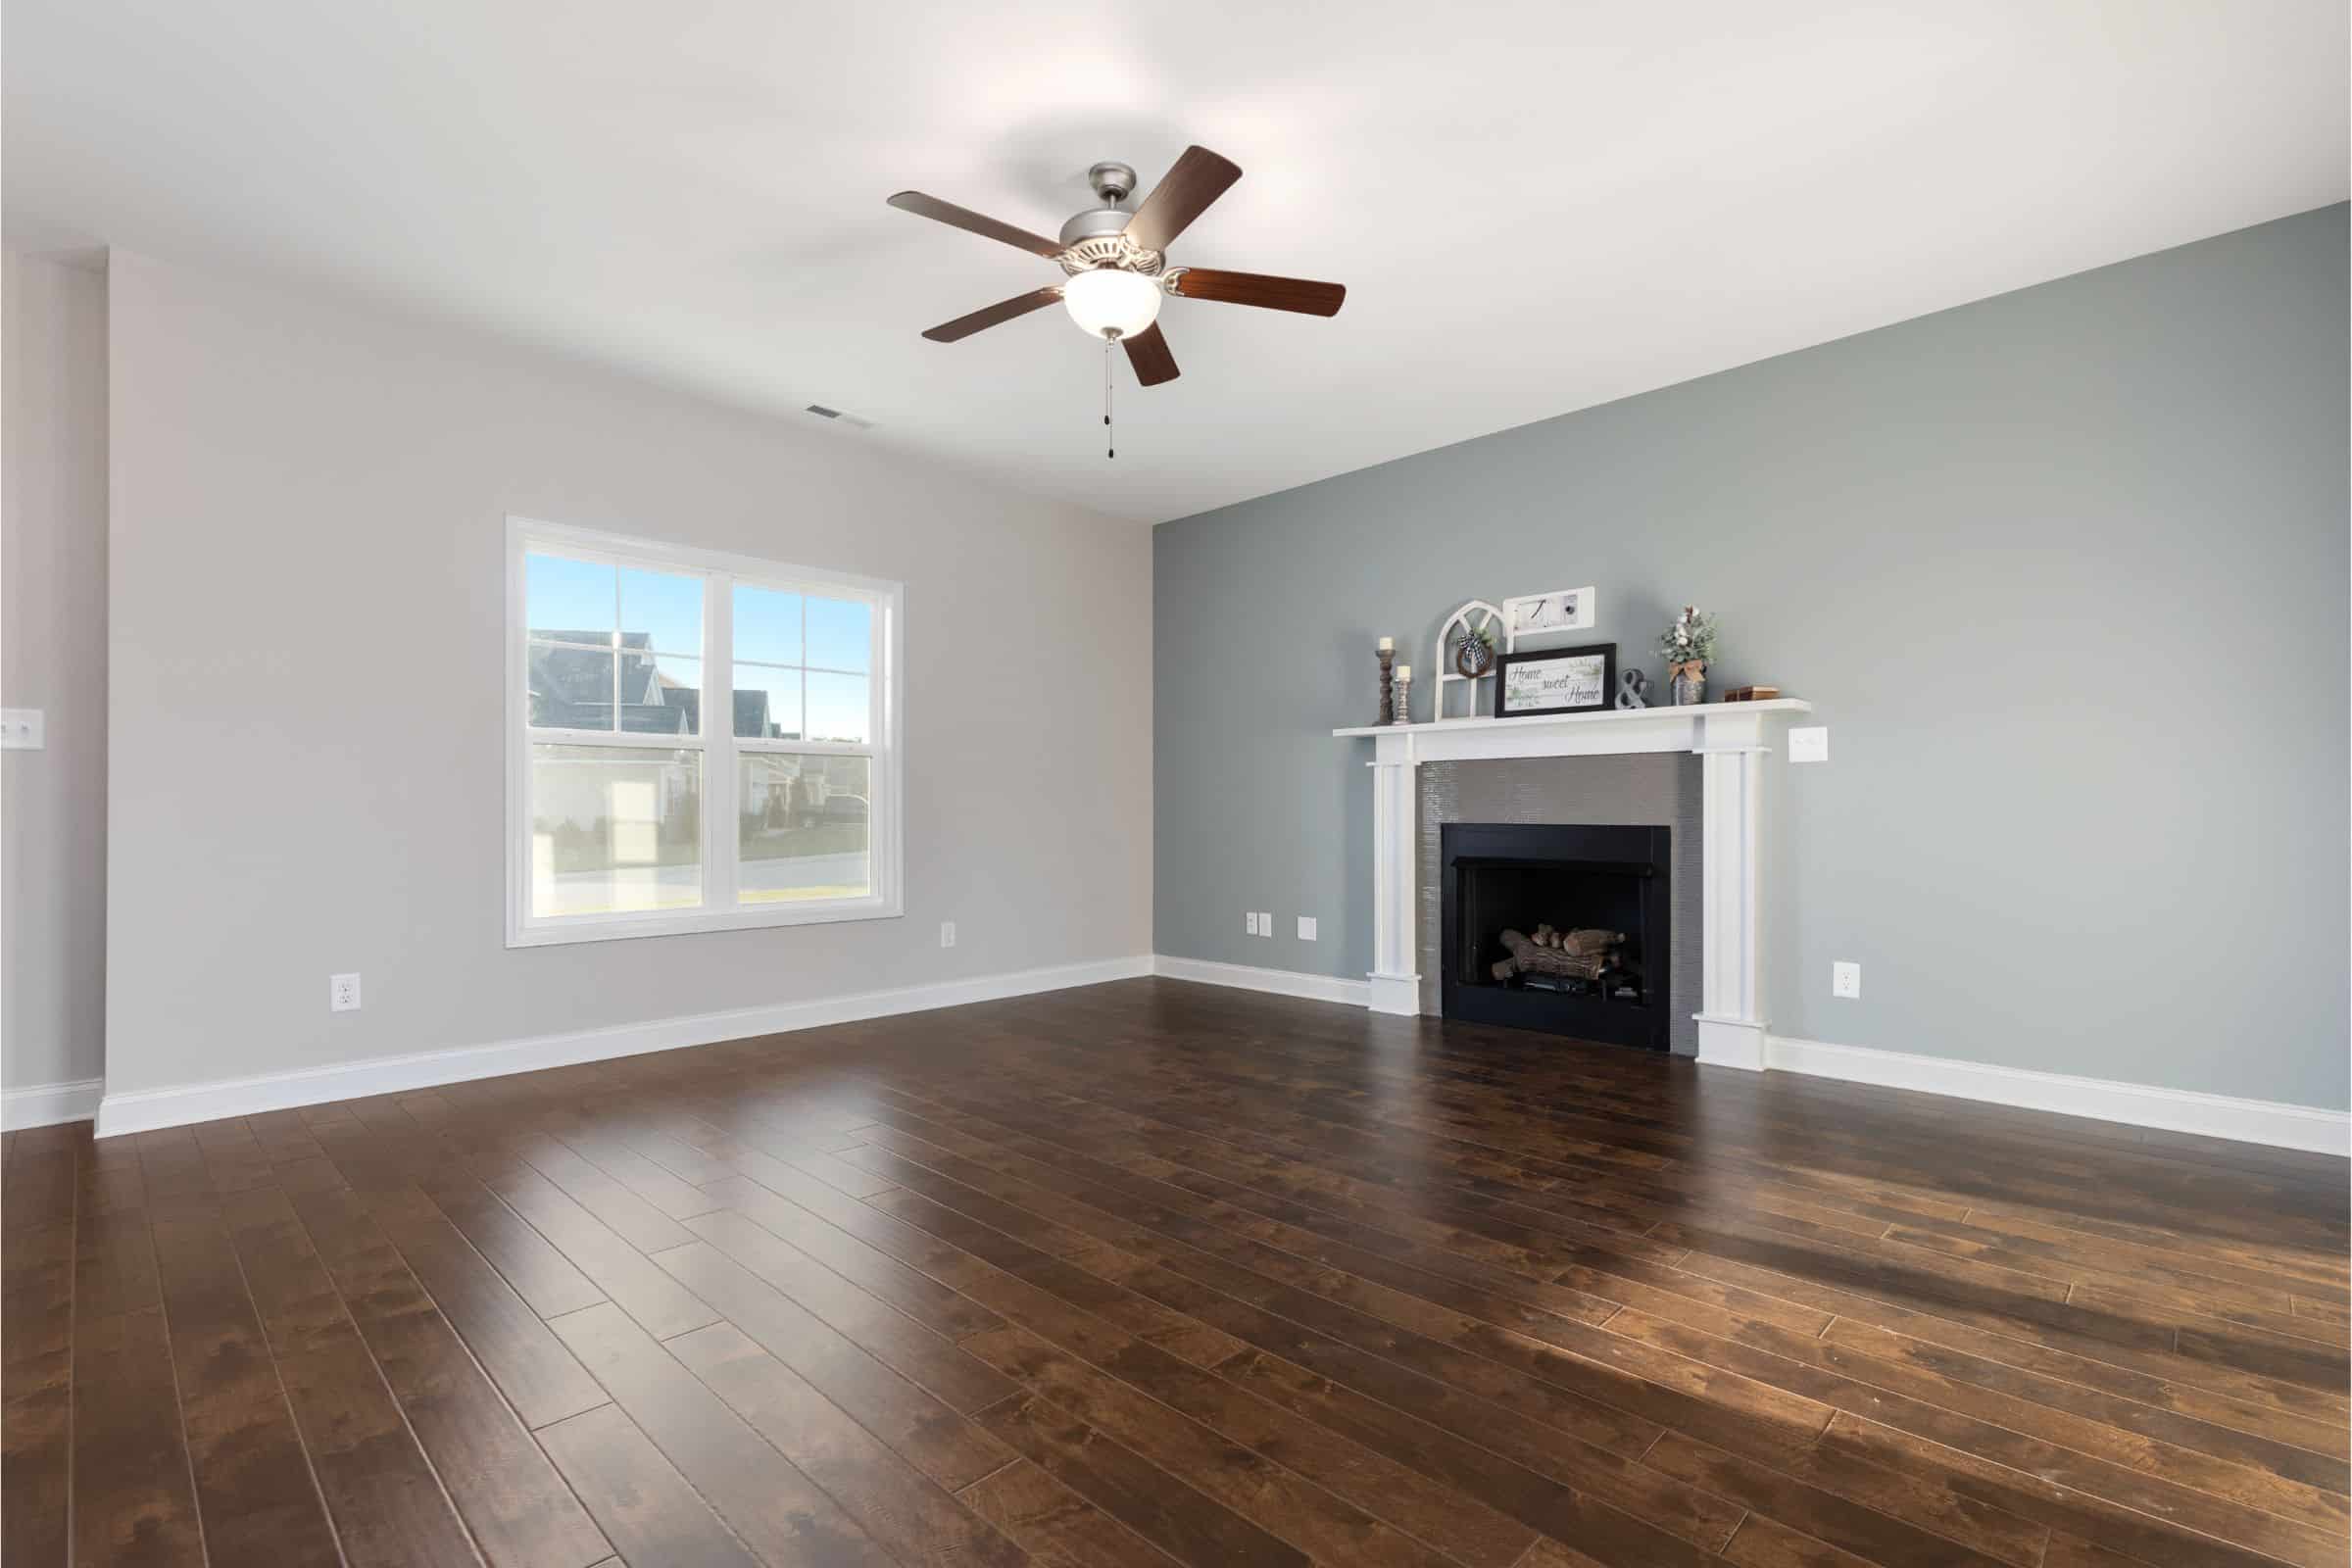 Empty Living room with dark wood floors and fireplace